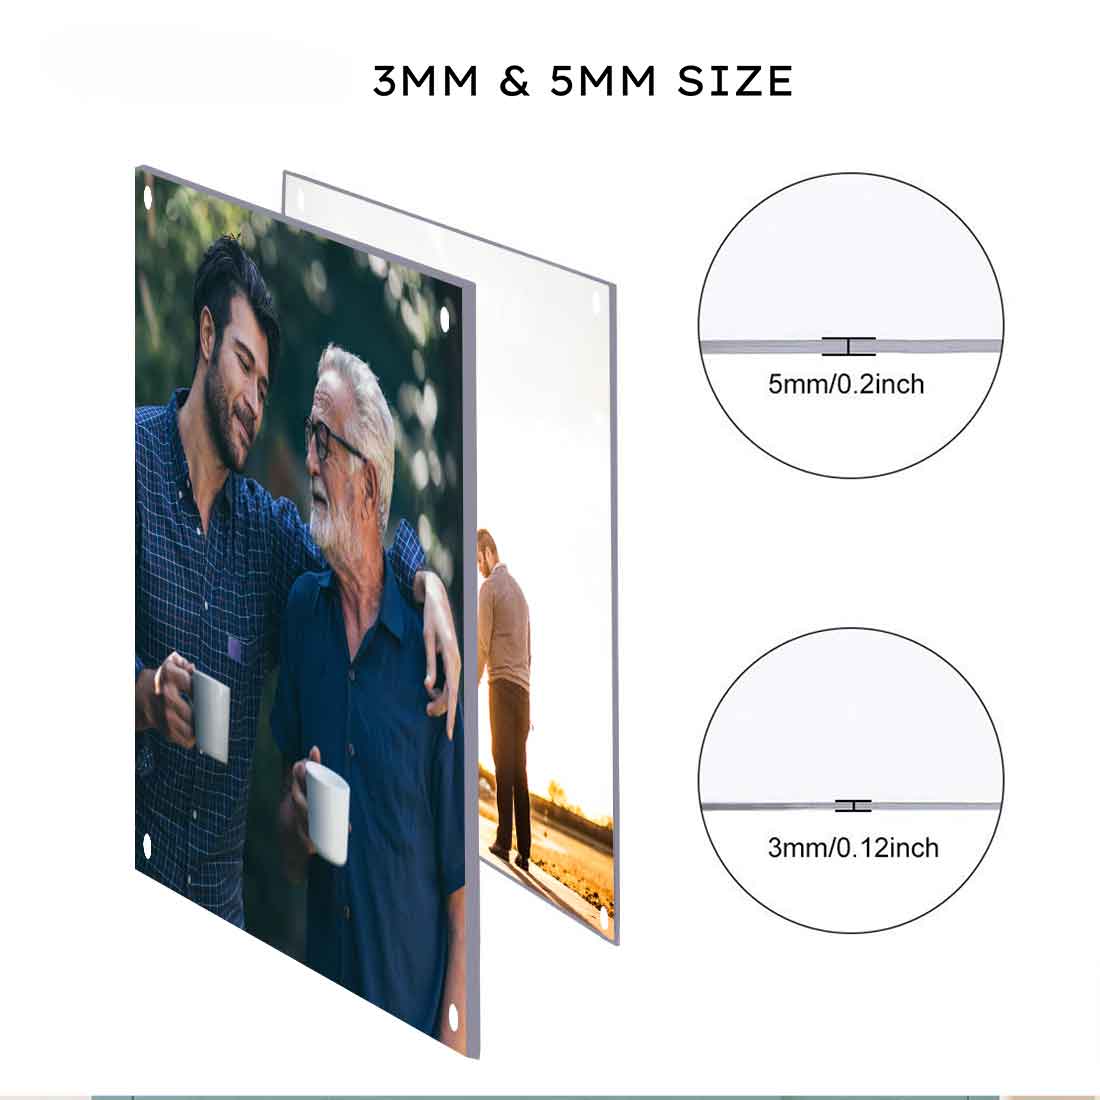 Acrylic Photo Frame - Premium Perspex Picture Frames with high definition printing - Available in various sizes